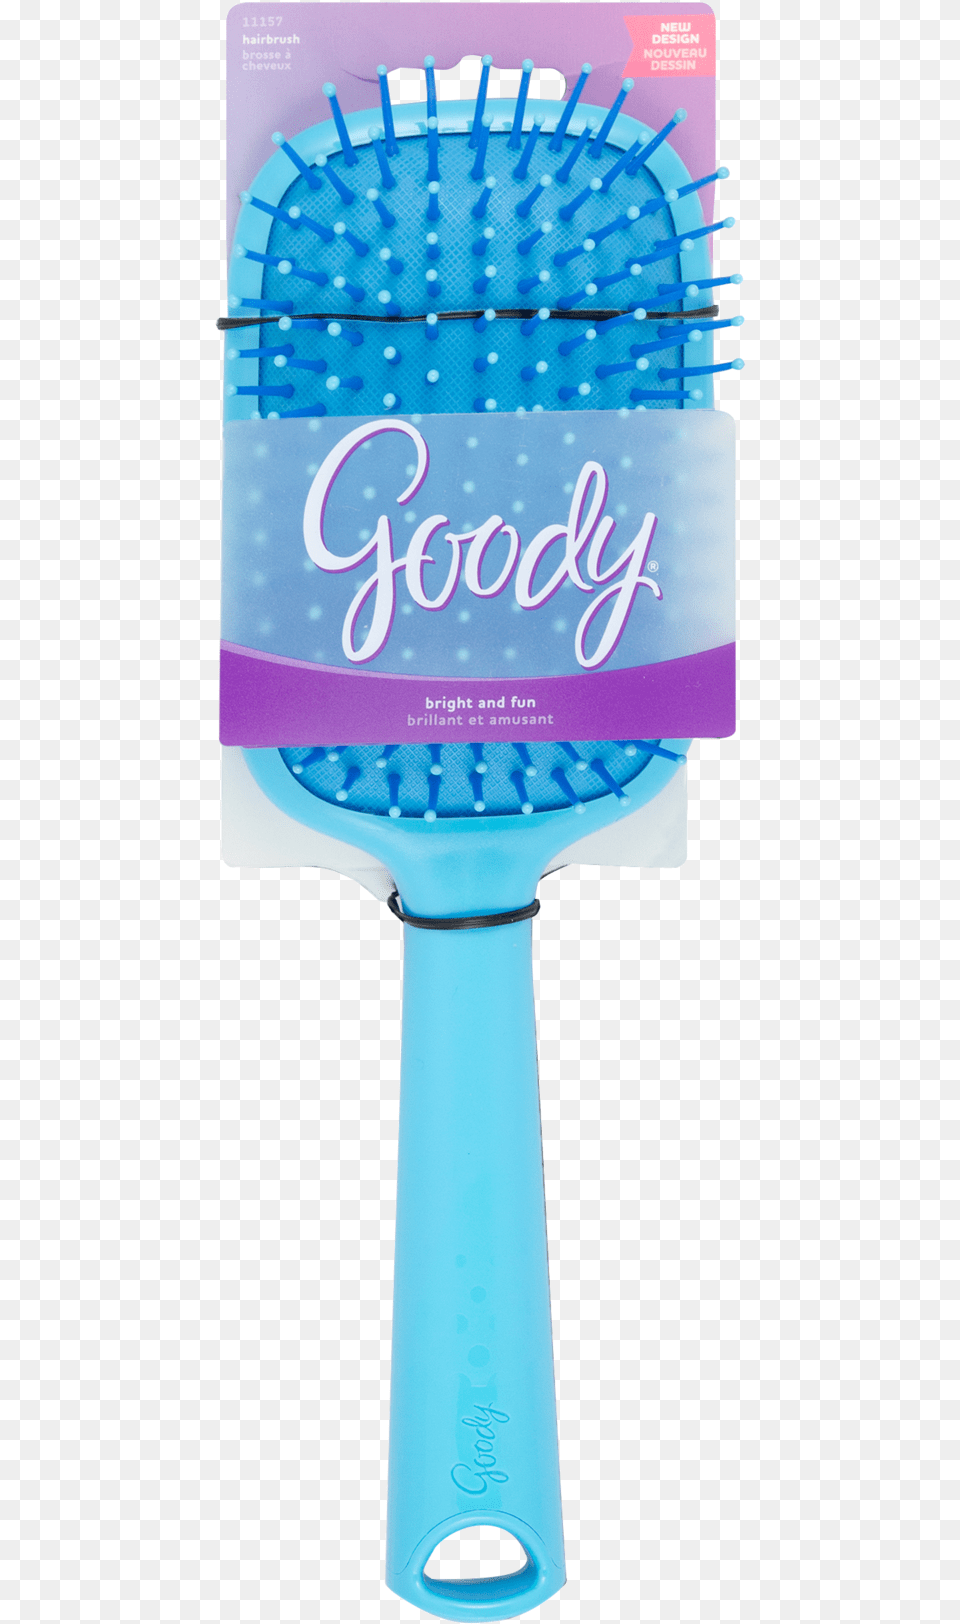 Goody Bright Boost Paddle Hair Brush Assorted Colors, Device, Tool Png Image